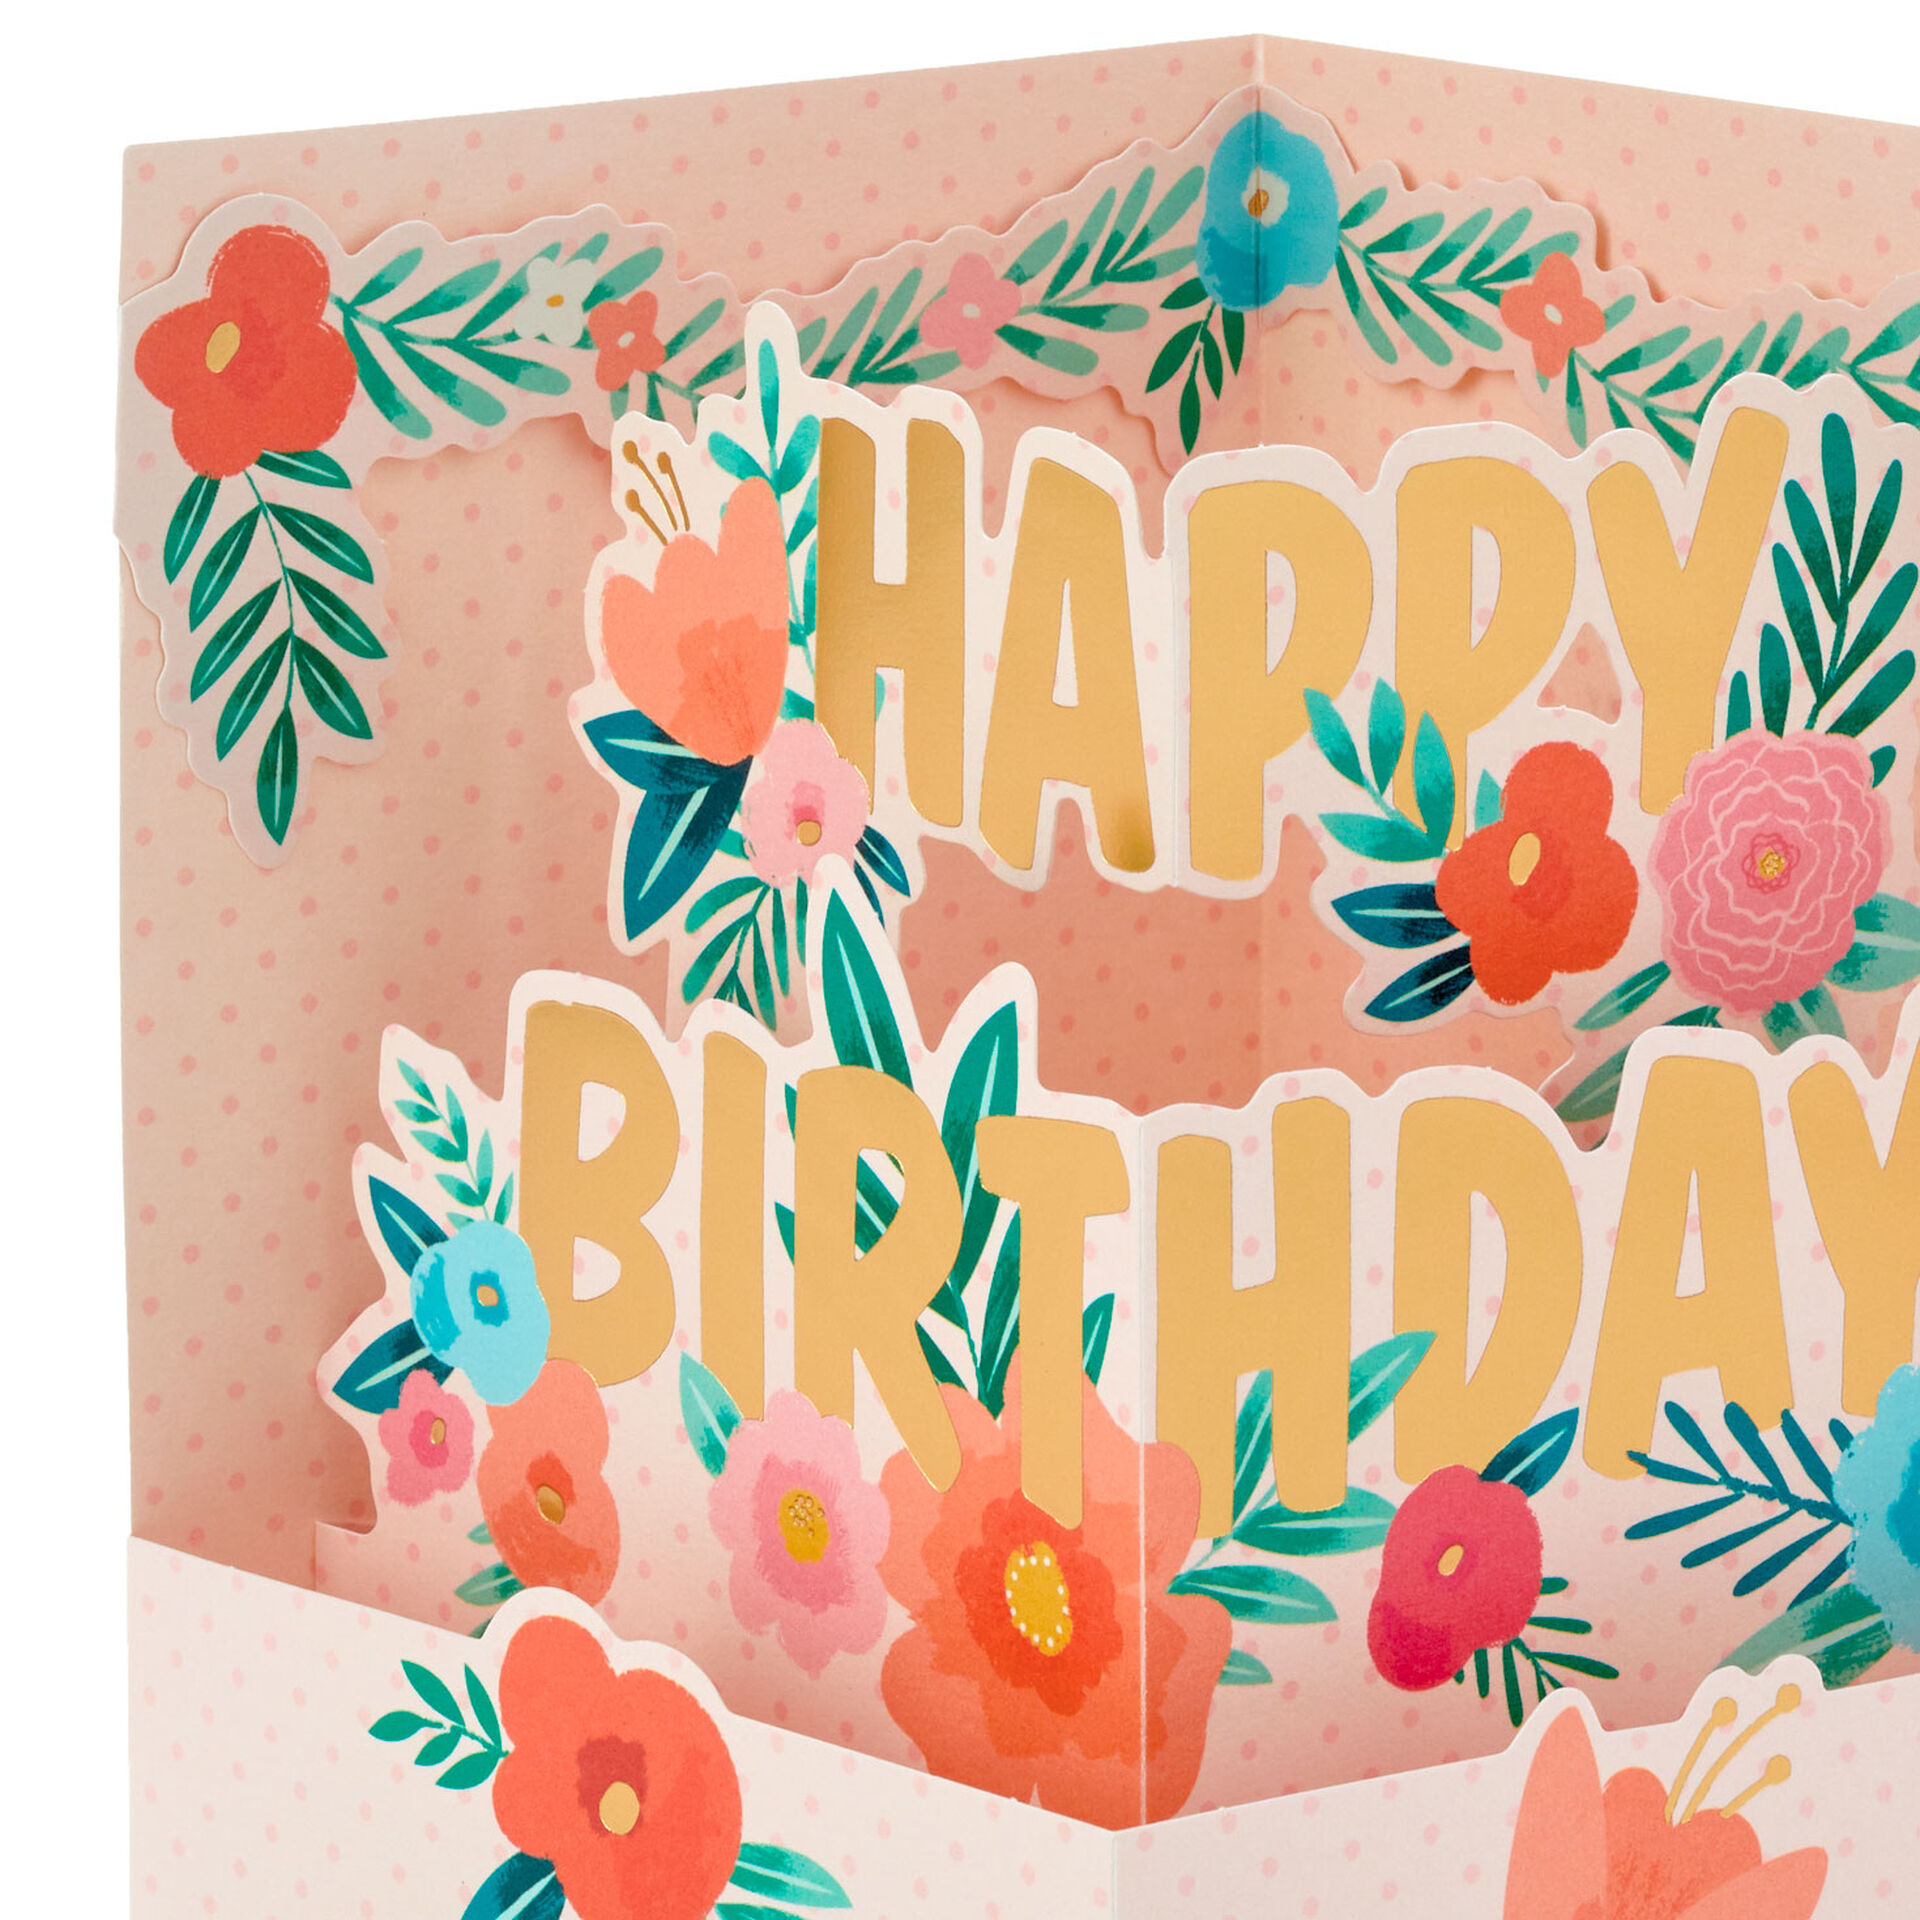 Flowers-3D-PopUp-Birthday-Card-for-Her_699WDR1155_02